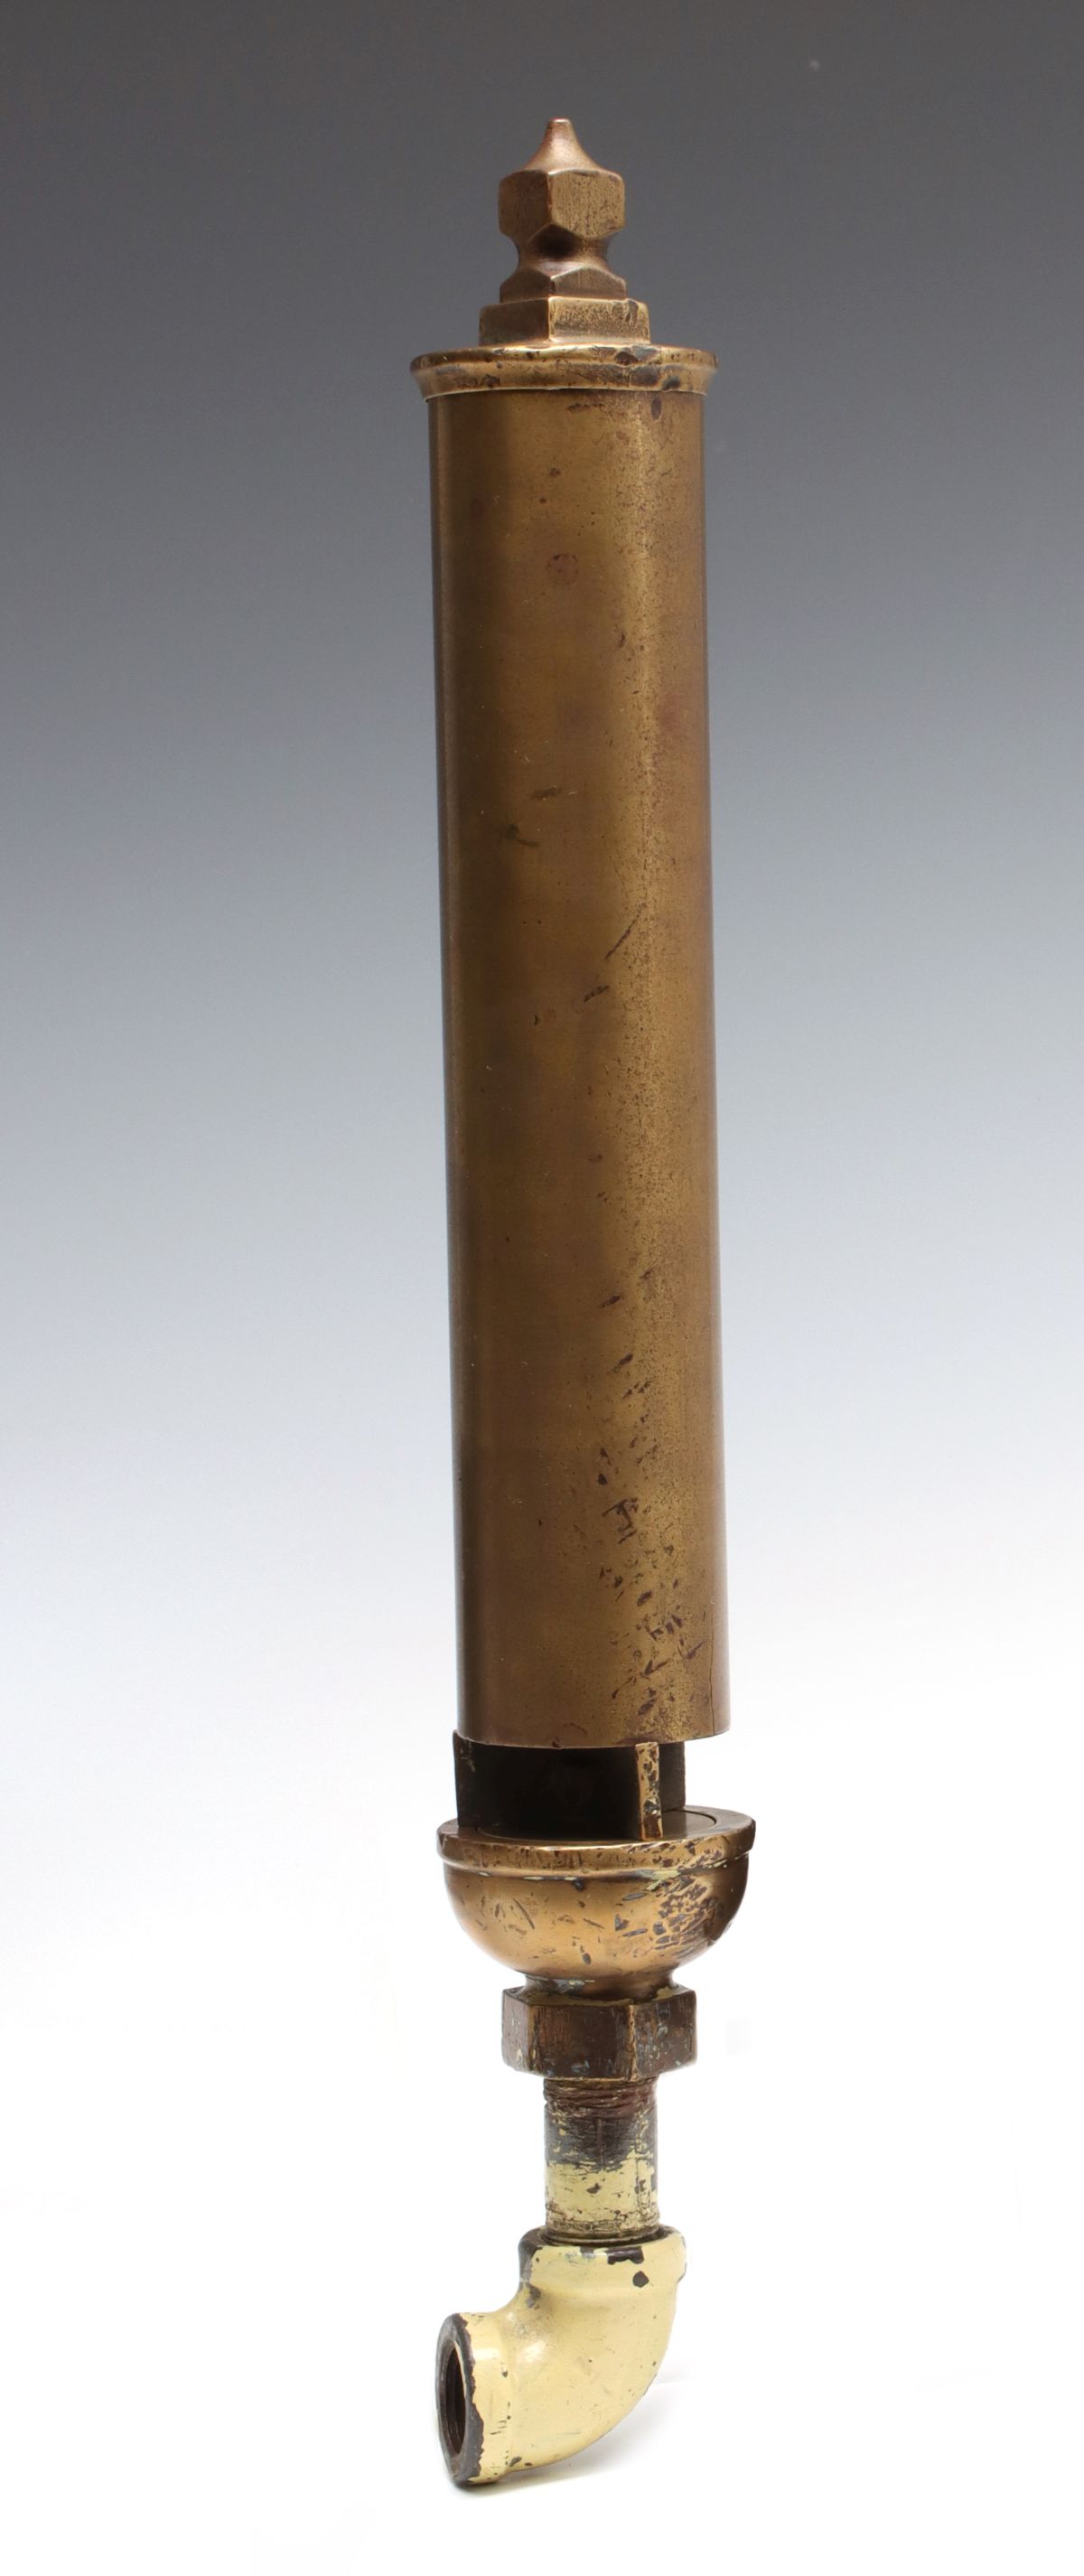 A THREE CHIME LONG BELL FLAT TOP BRASS STEAM WHISTLE